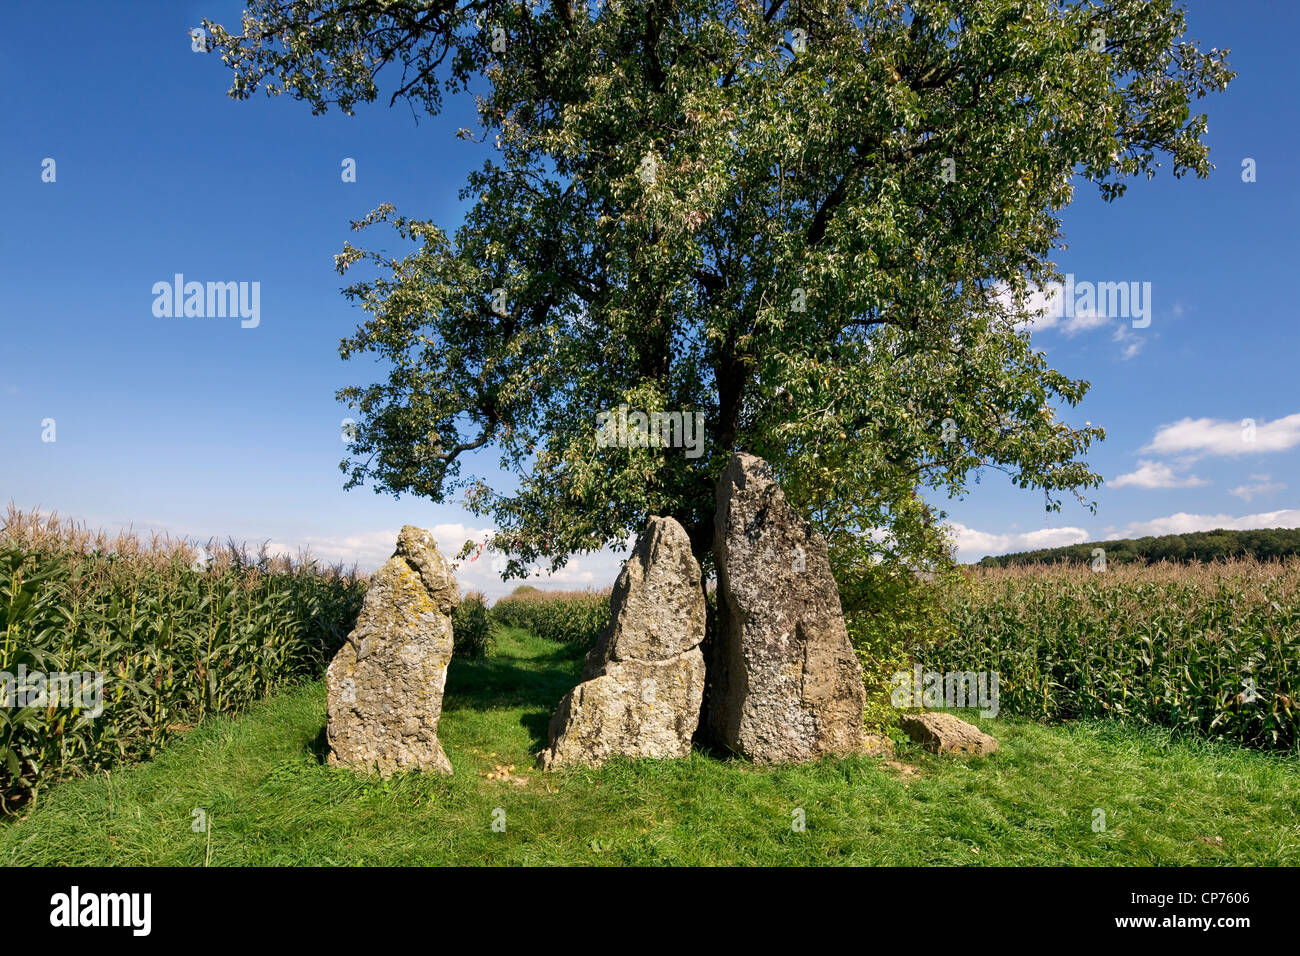 The 3 standing stones / menhirs of Oppagne near Wéris, Belgian Ardennes, Luxembourg, Belgium Stock Photo